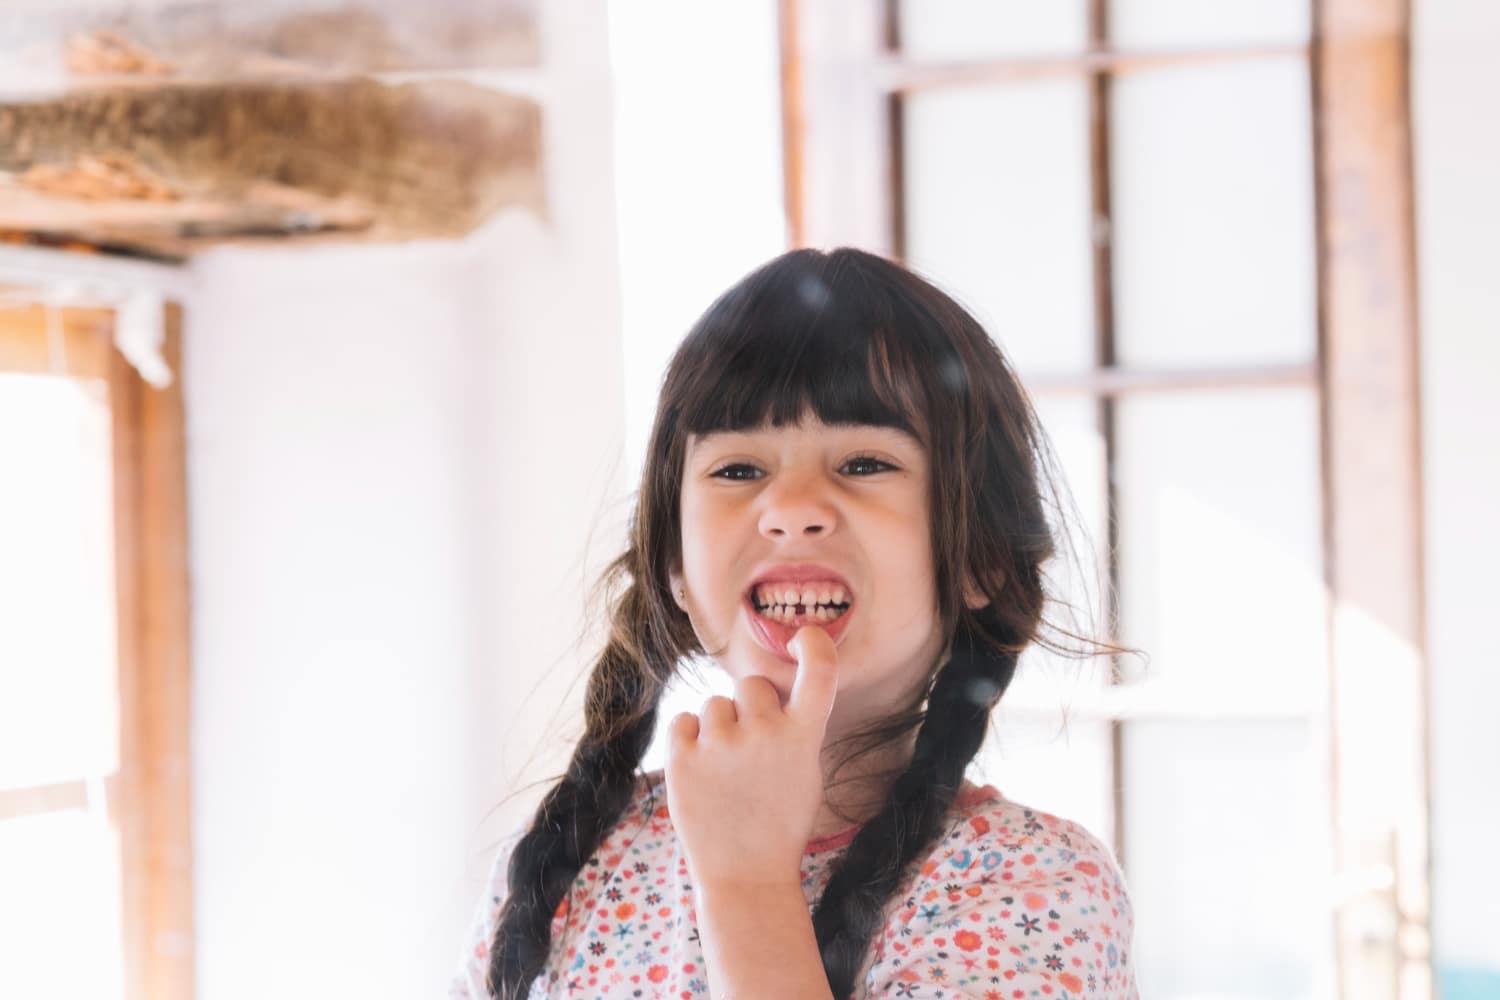 Most Childhood Tooth Injuries Are Preventable